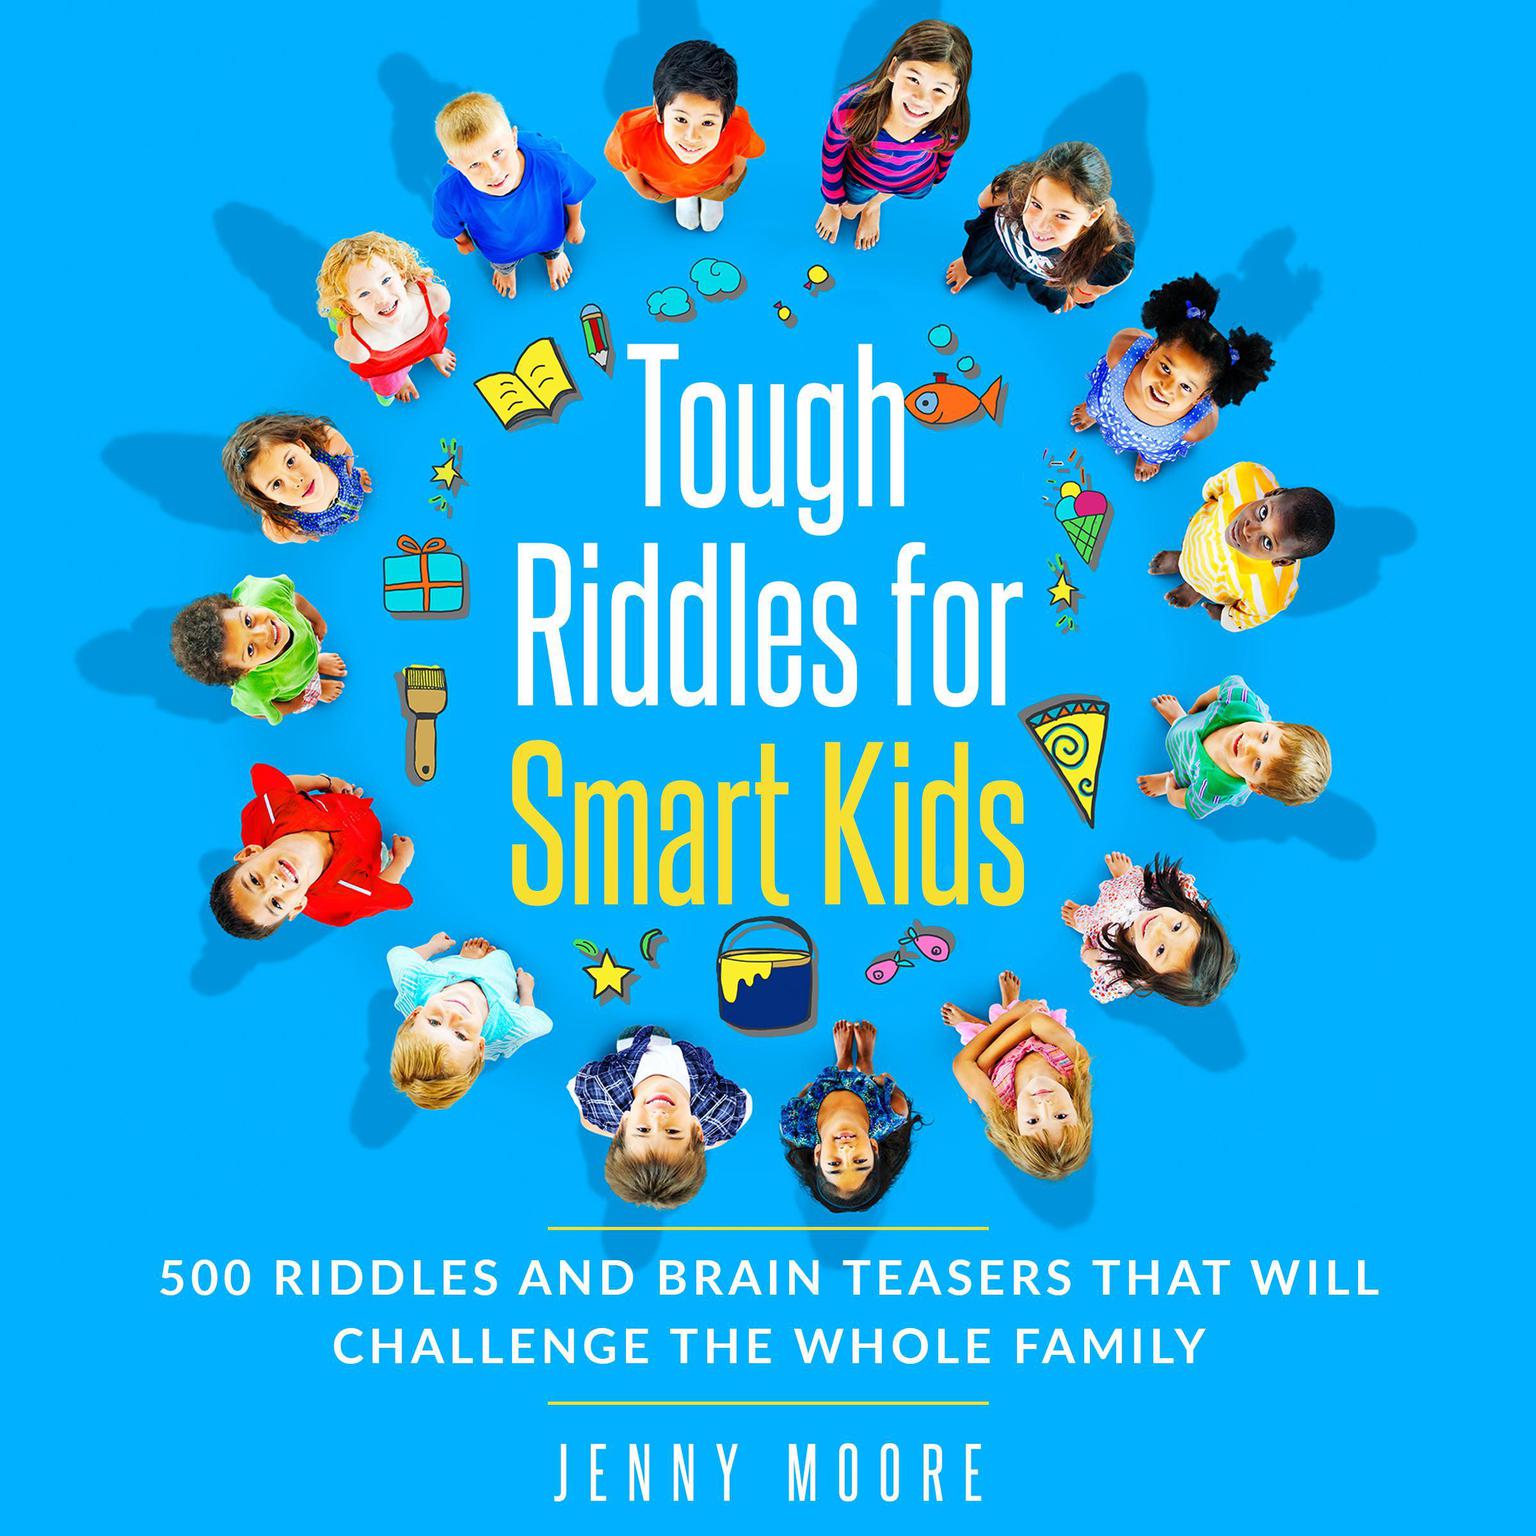 Tough Riddles for Smart Kids: 500 Riddles and Brain Teasers that Will Challenge the Whole Family: 500 Riddles and Brain Teasers that Will Challenge the Whole Family Audiobook, by Jenny Moore